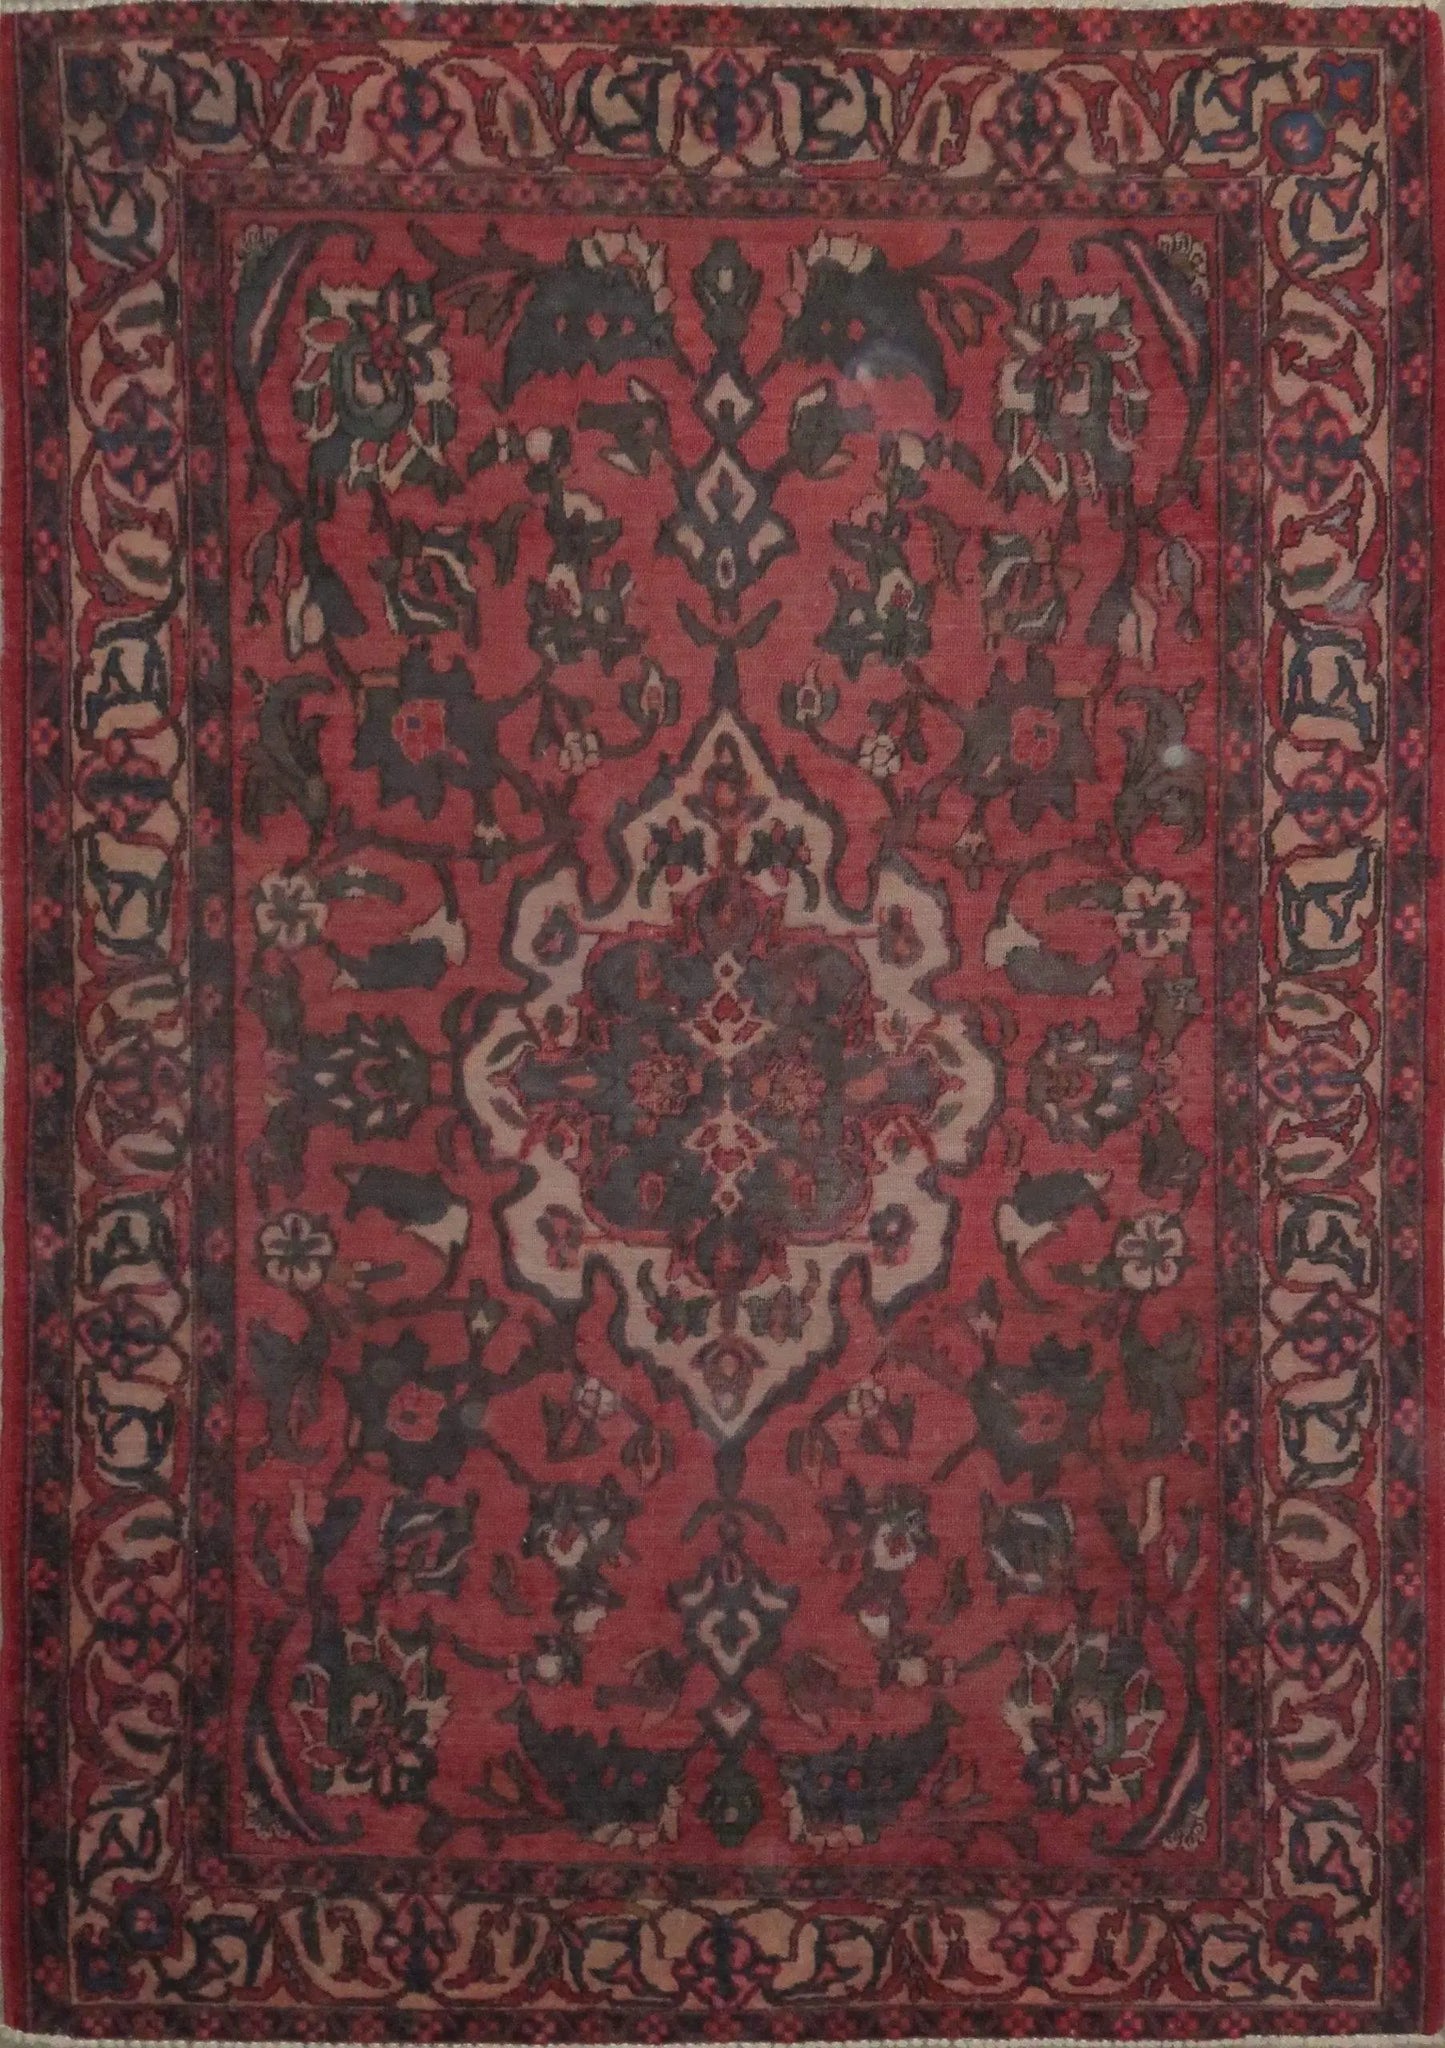 Hand-Knotted Vintage Rug 6'7" x 4'7"